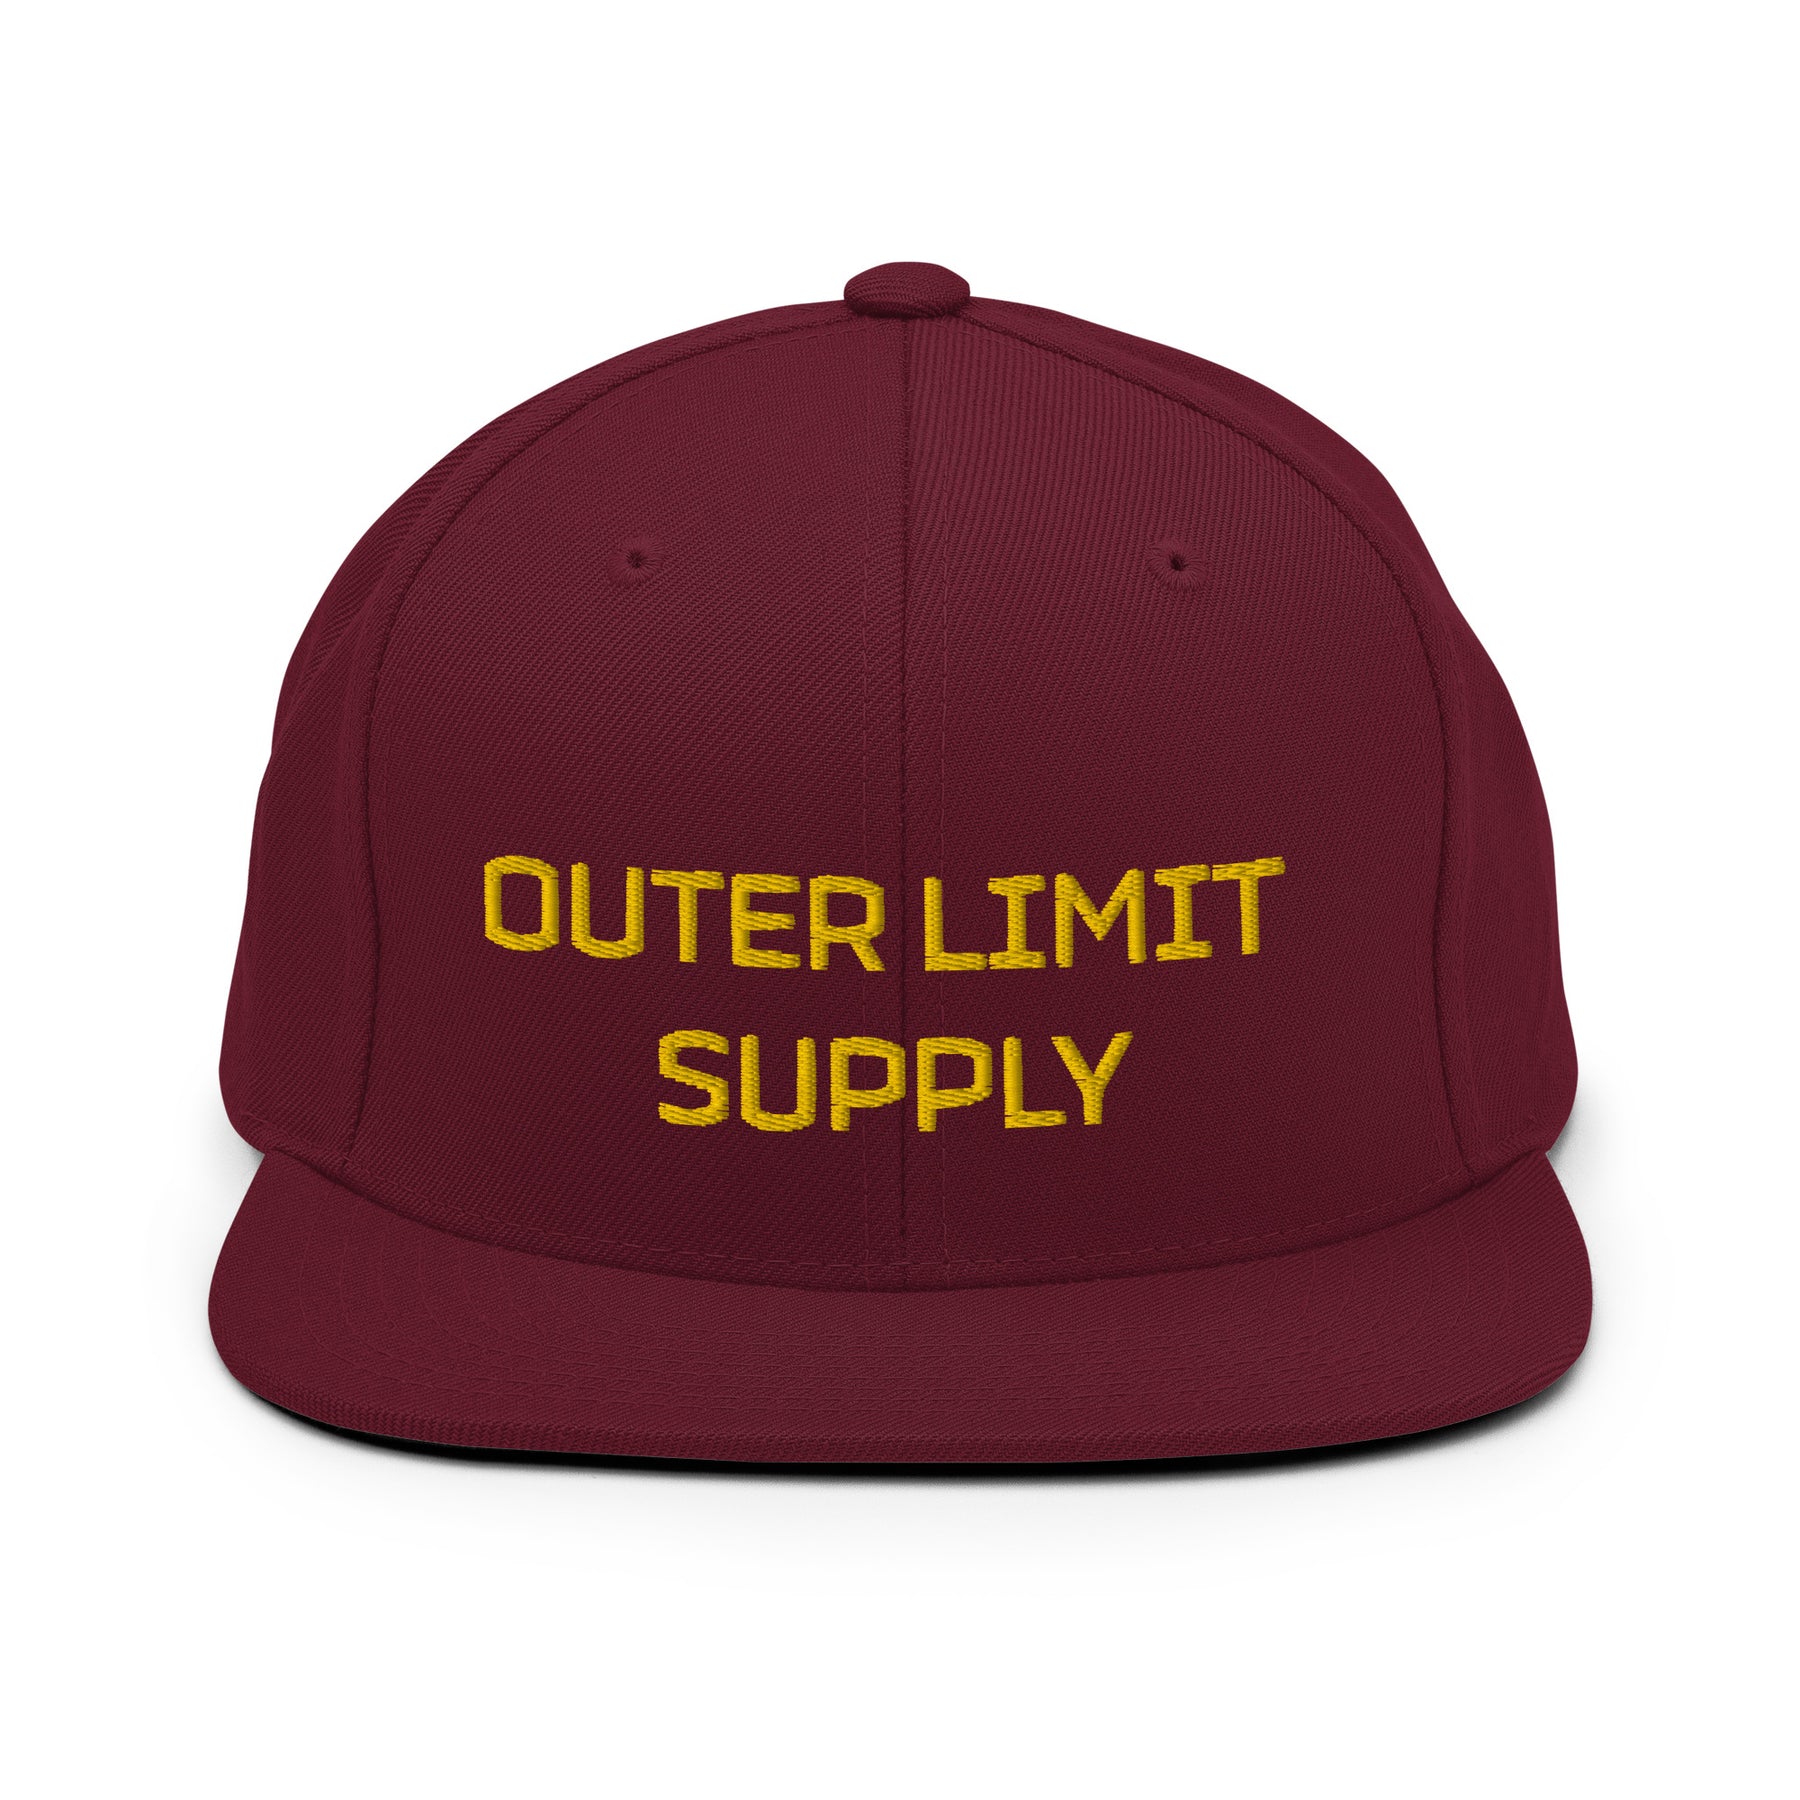 Outer Limit Supply "Gold Bold" Embroidered Snapback Hat